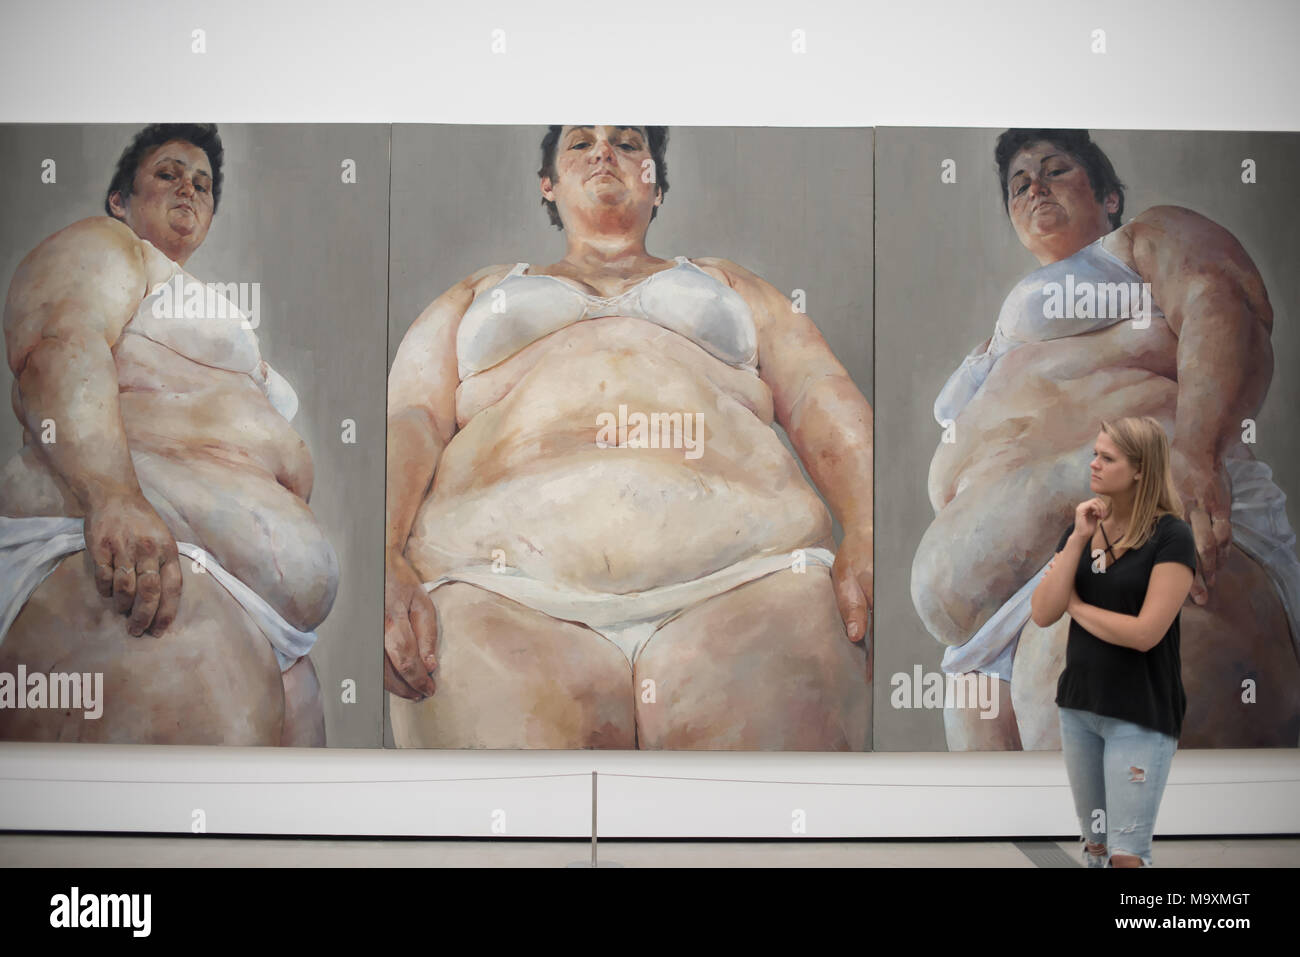 LOS ANGELES, CA - March 15, 2018: 'Strategy' by Jenny Saville in The Broad Museum in Downtown of Los Angeles on March 15, 2018. Stock Photo